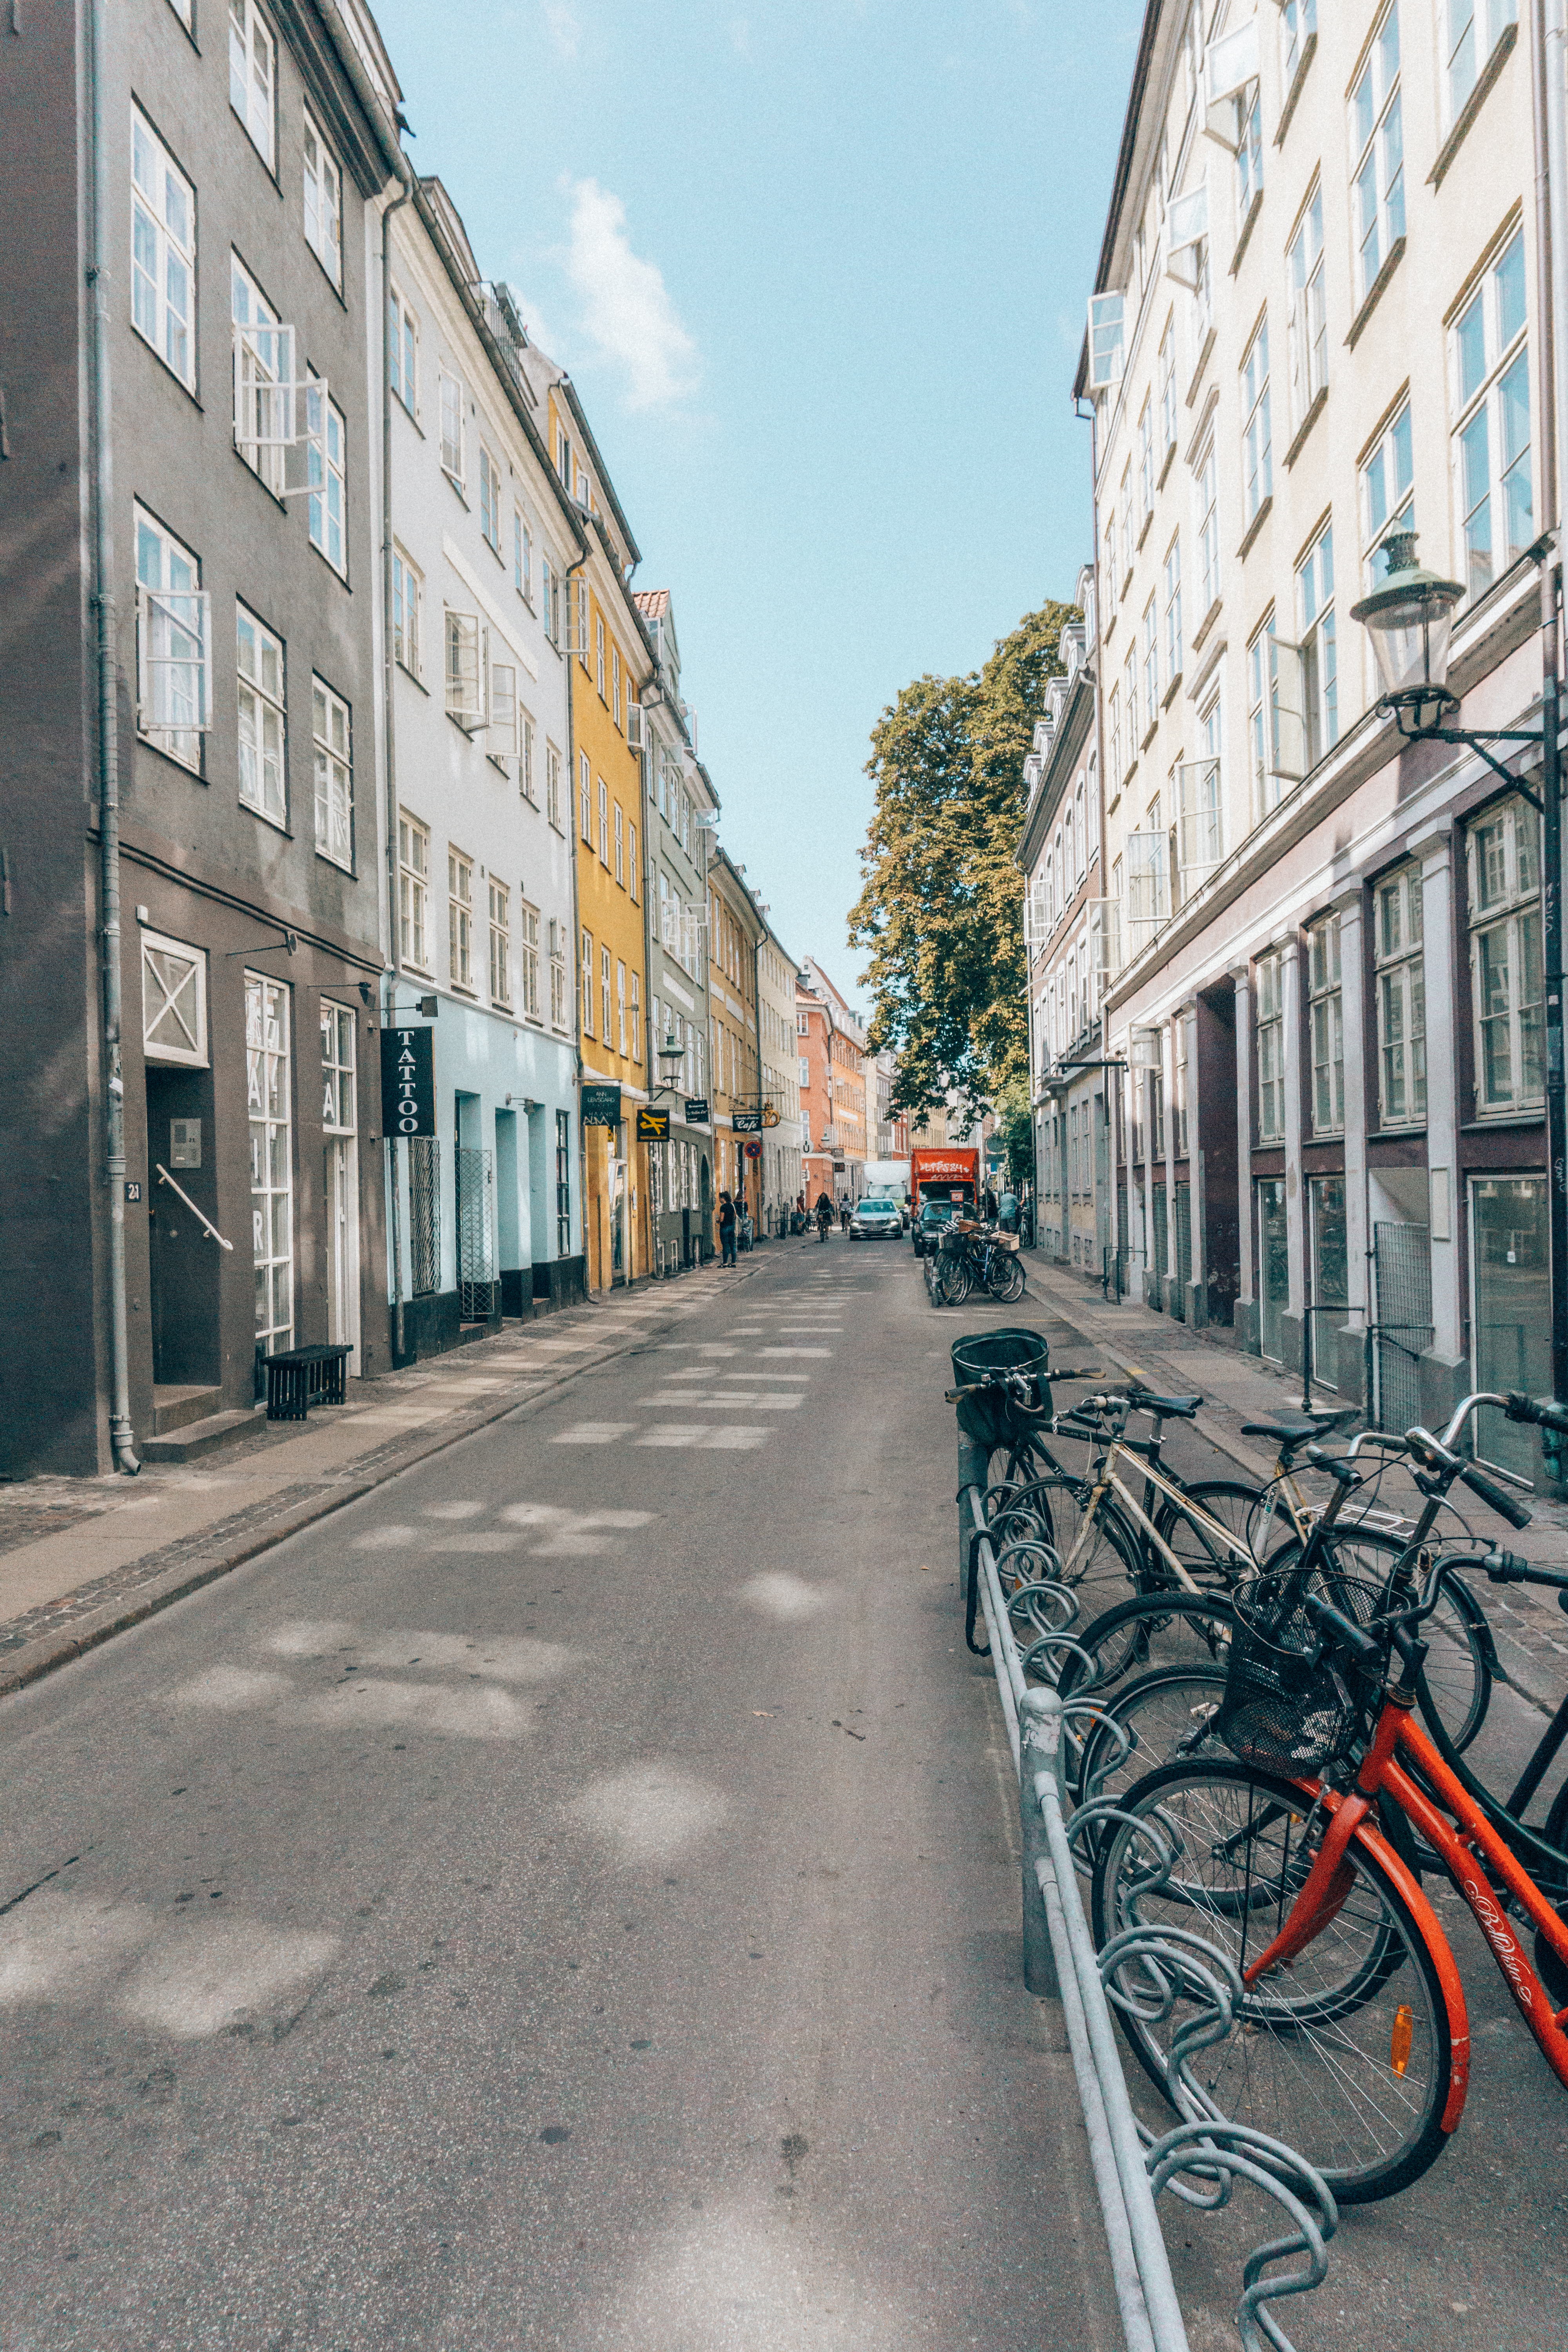 Bikes and colourful apartment buildings line a typical laneway in Copenhagen